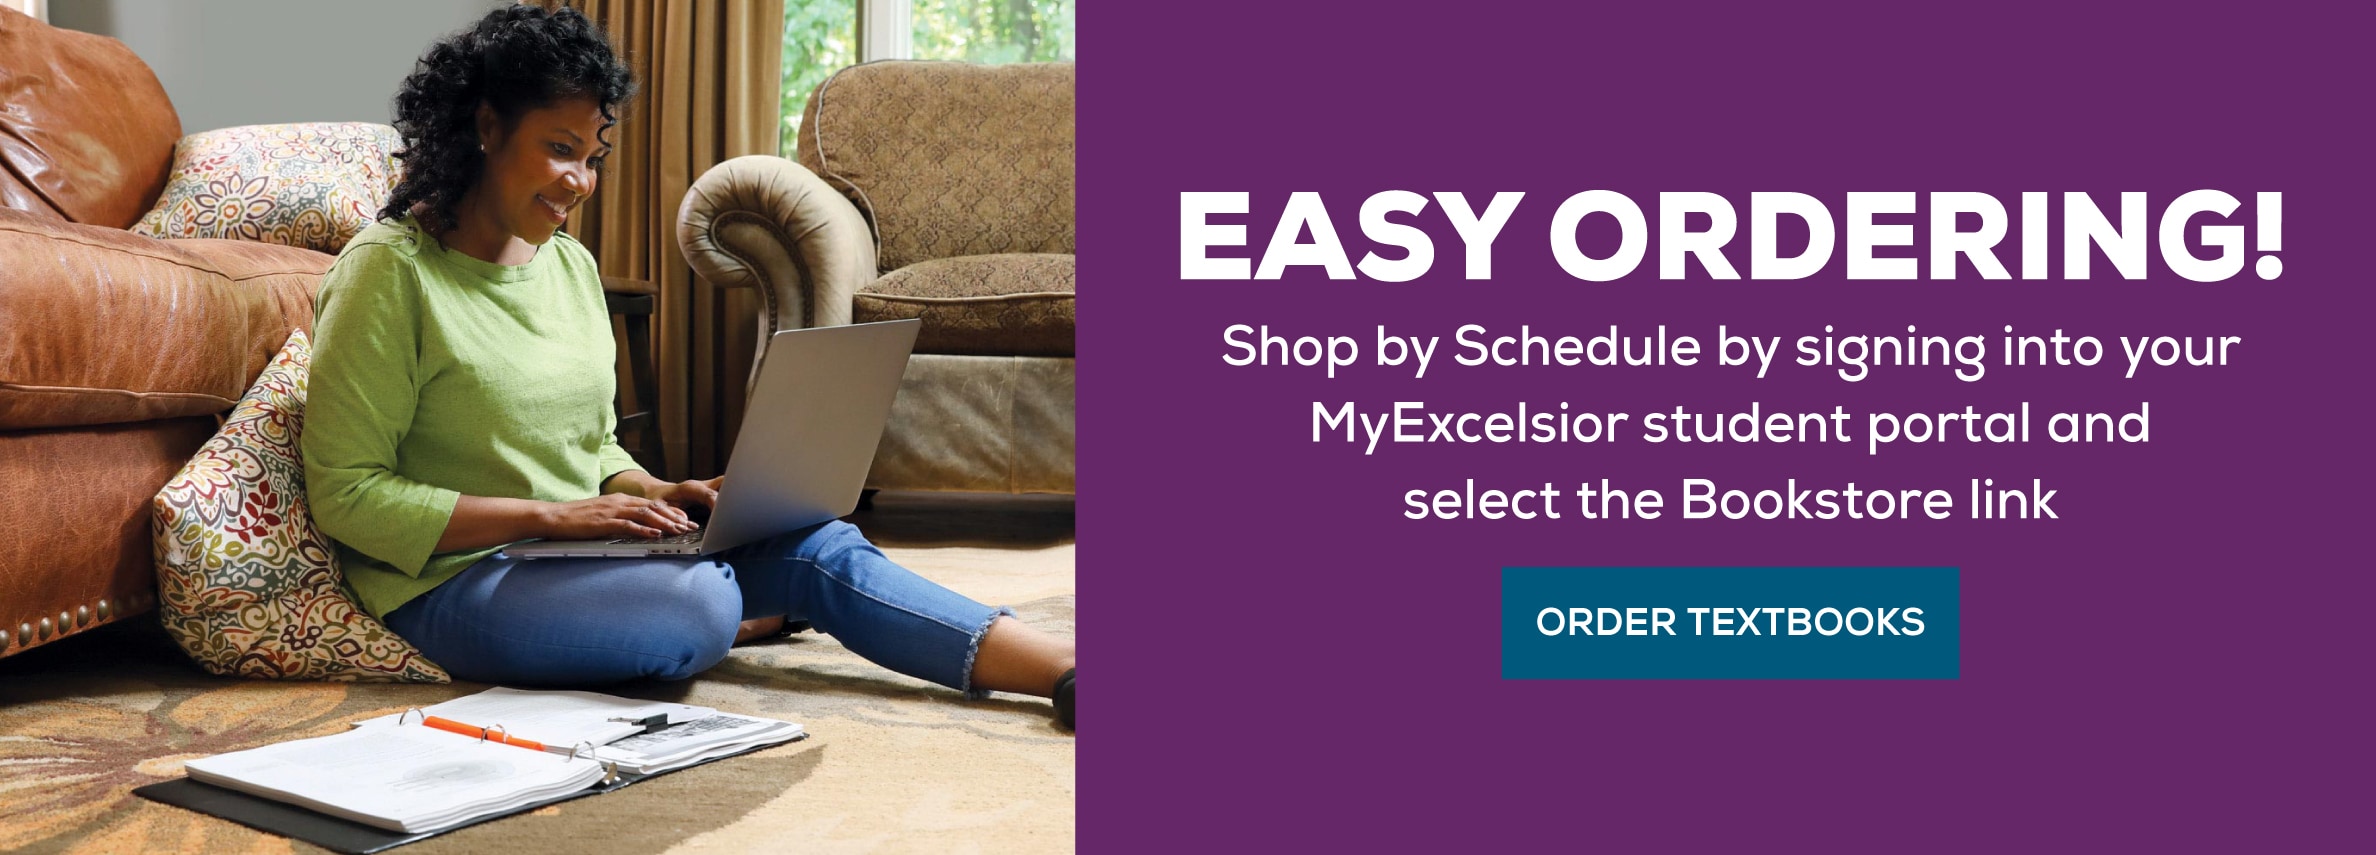 Easy Ordering. Shop by schedule by signing in with your MyExcelsior student portal and select the Bookstore link. Order Textbooks. (new tab)